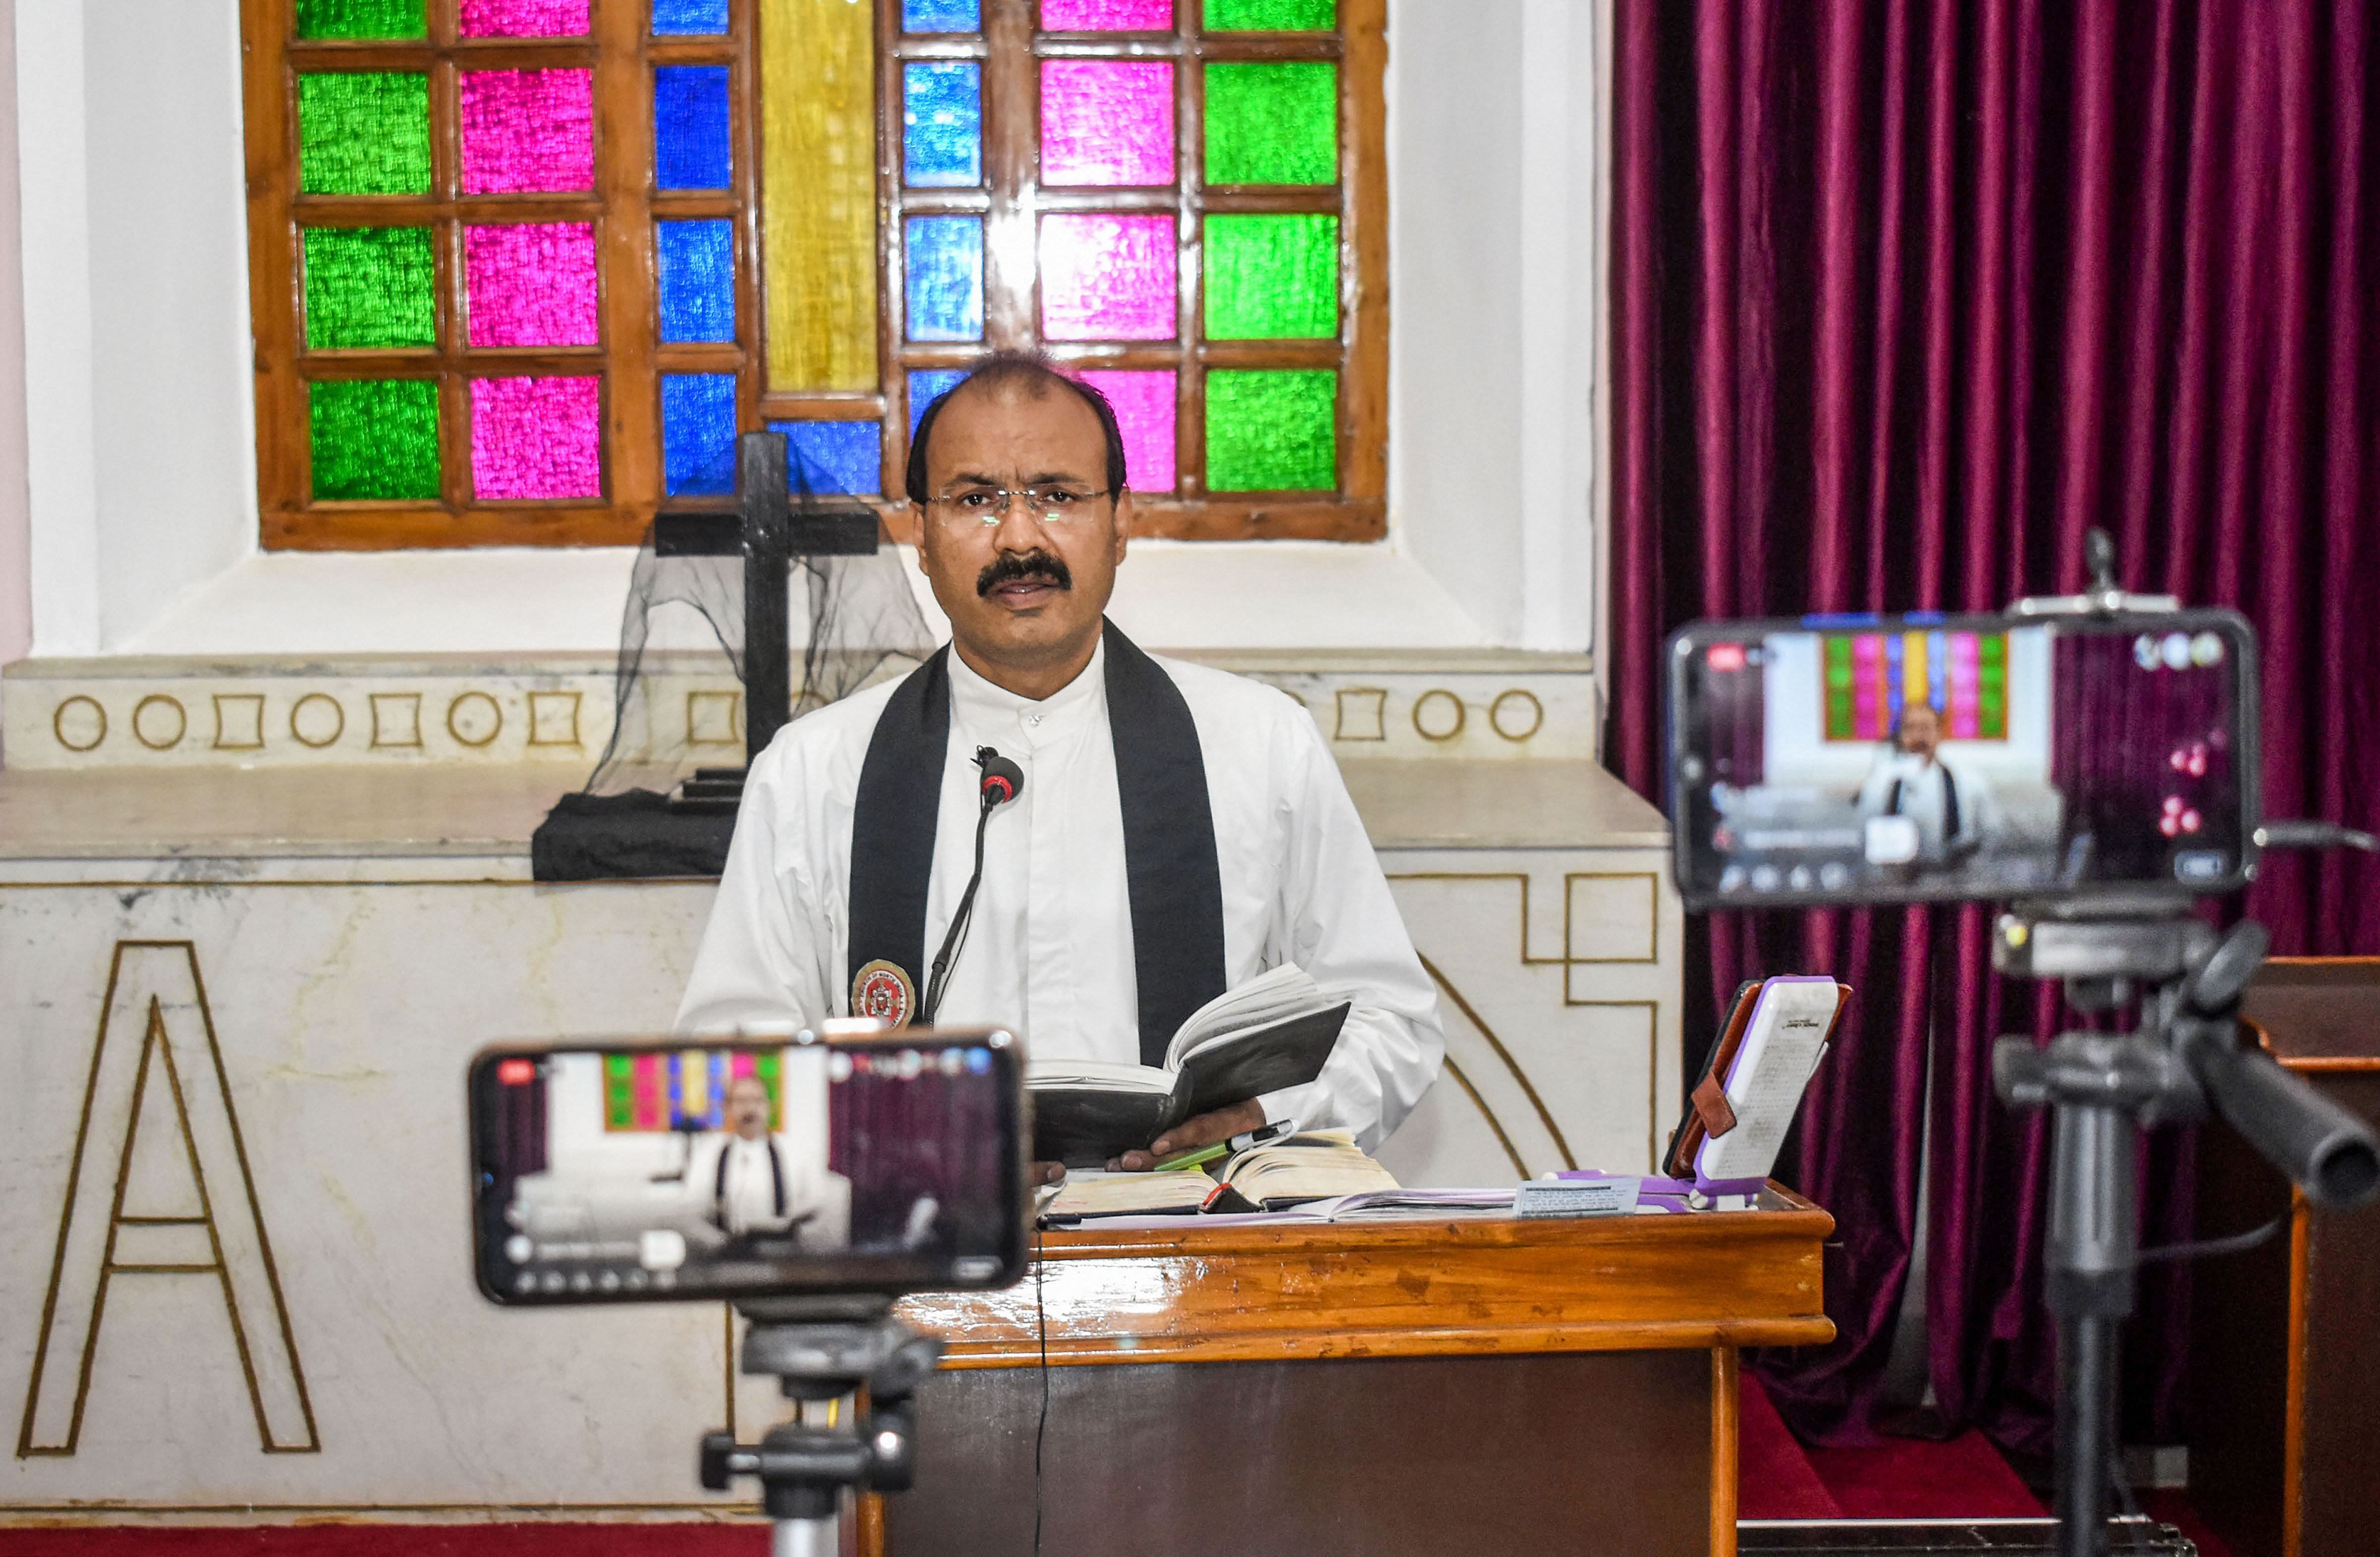 A priest prepares for mass prayers on Good Friday via online live streaming during the nationwide lockdown, in wake of the coronavirus outbreak, at a church, in Prayagraj. (Credit: PTI Photo)